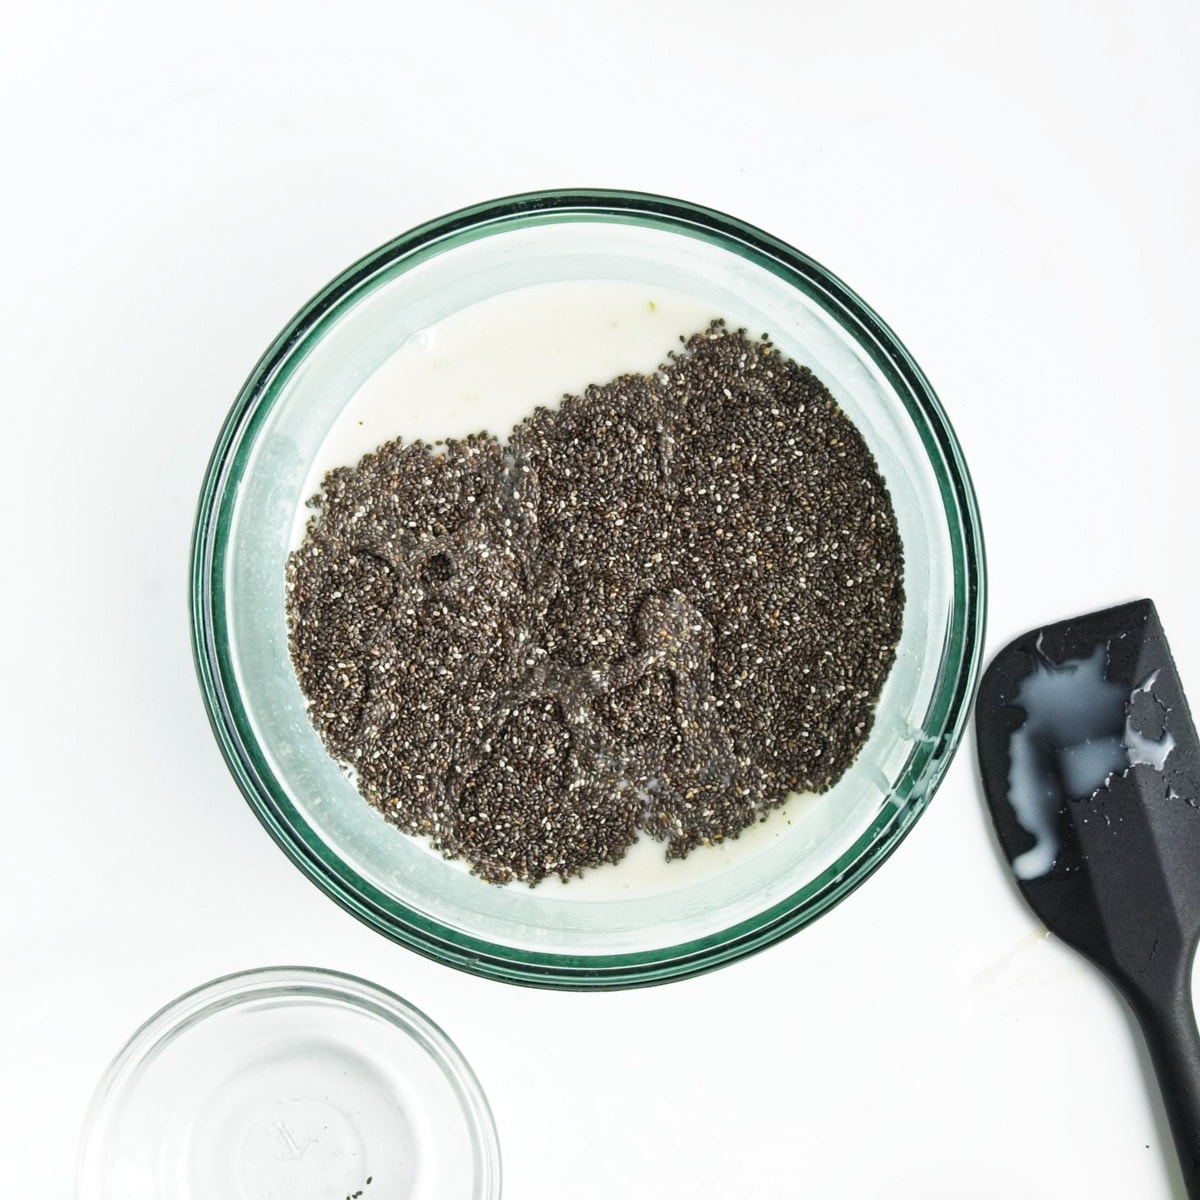 Mixing chia seeds with coconut milk in a mixing bowl.